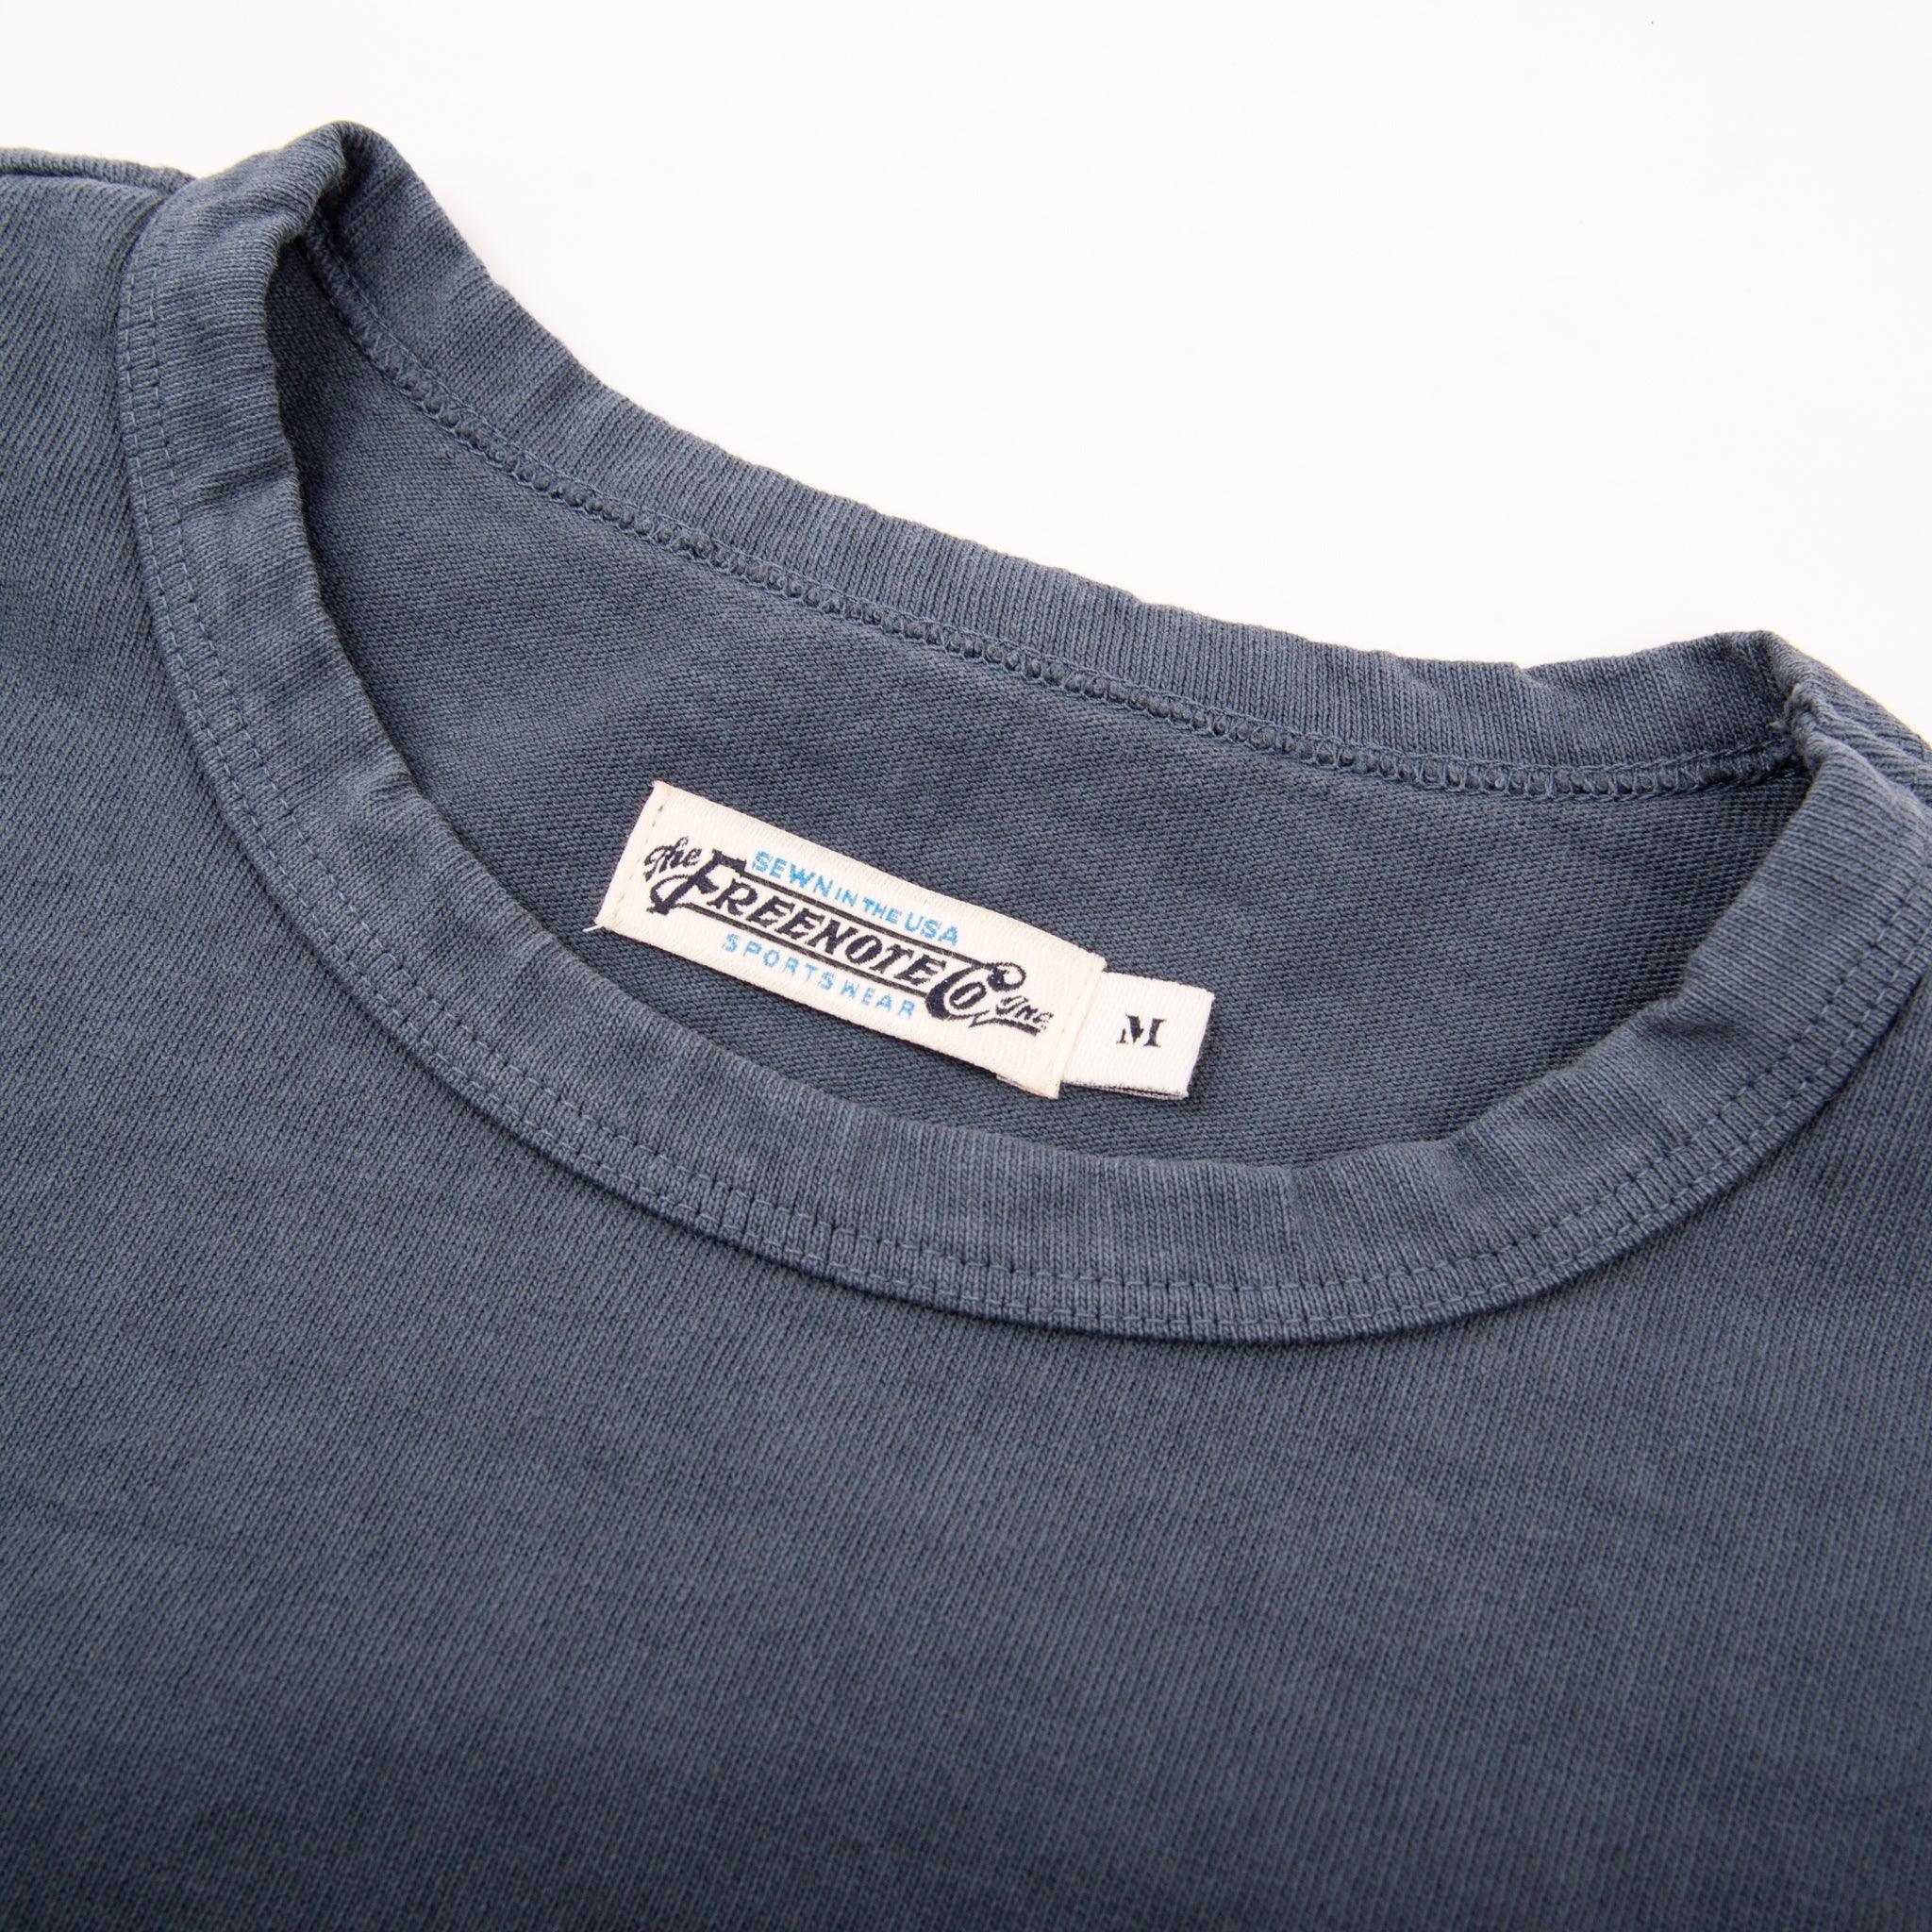 Heavyweight 13oz Pocket Tee - Faded Blue - Guilty Party